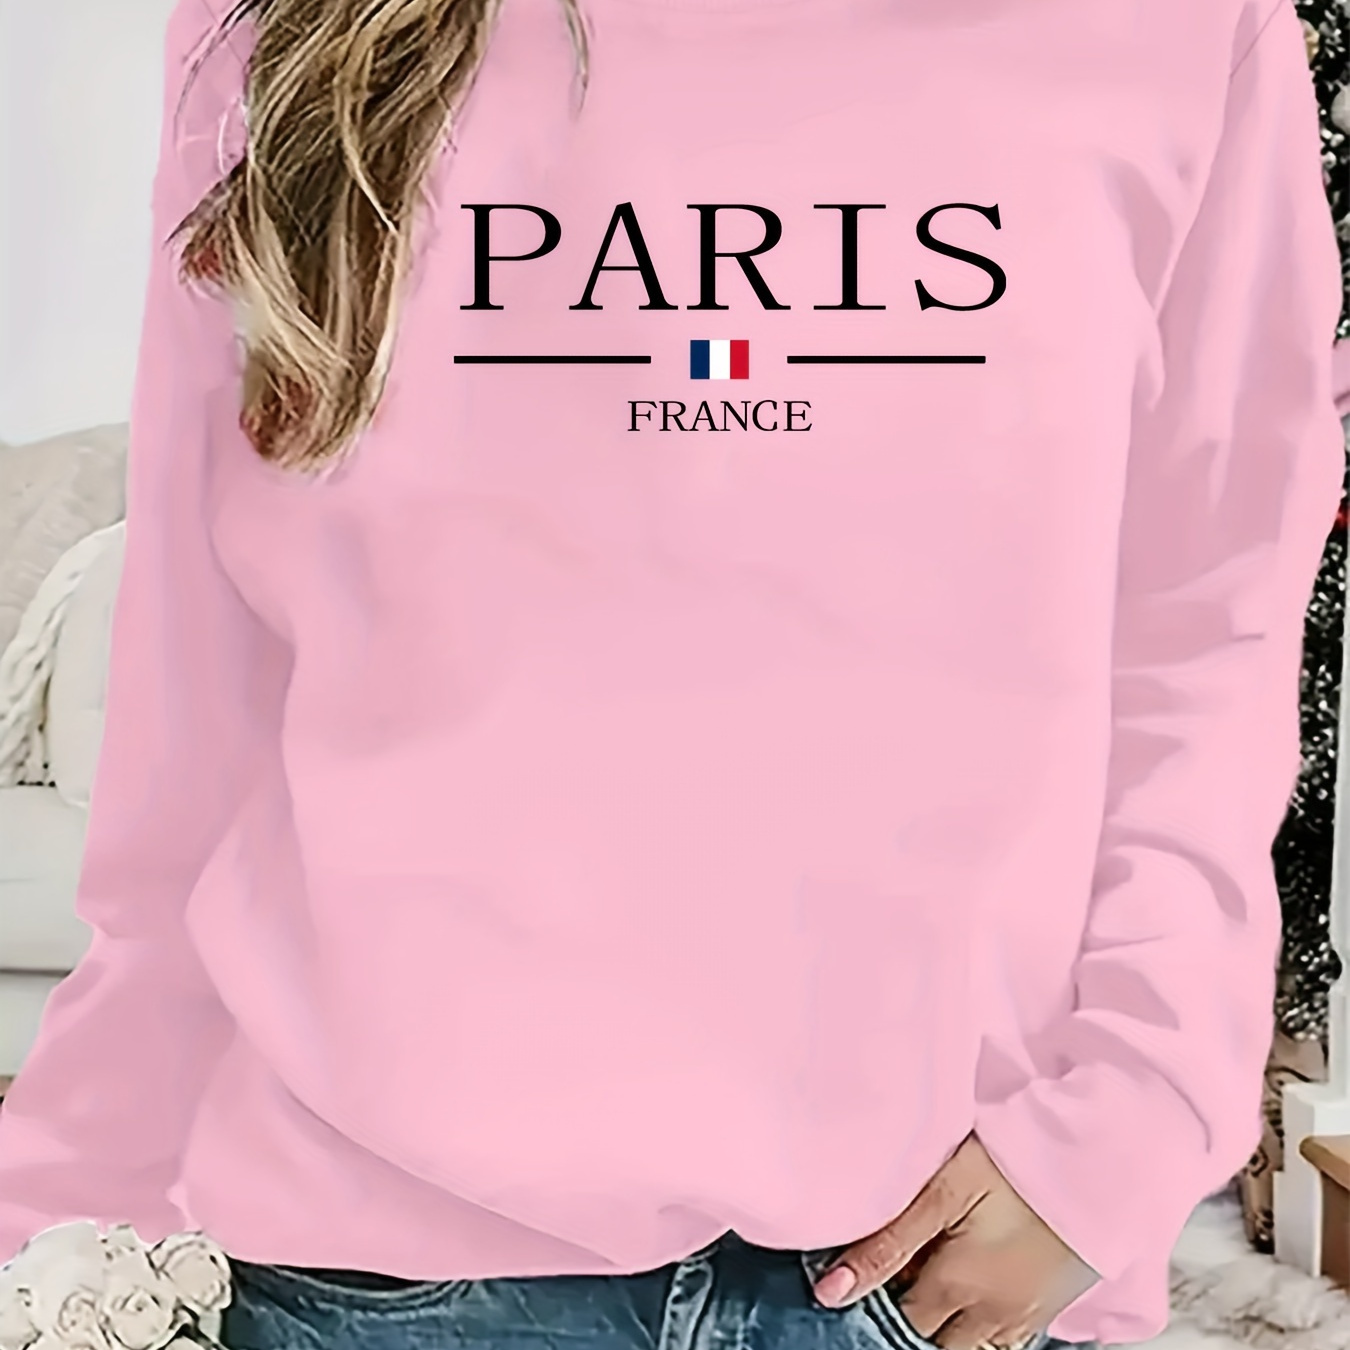 

Women's Casual Crew Neck Sweatshirt With Paris Lettering - Simple Pattern Print, Fashionable Long Sleeve Pullover, Ribbed Cuffs And Hem For Fall